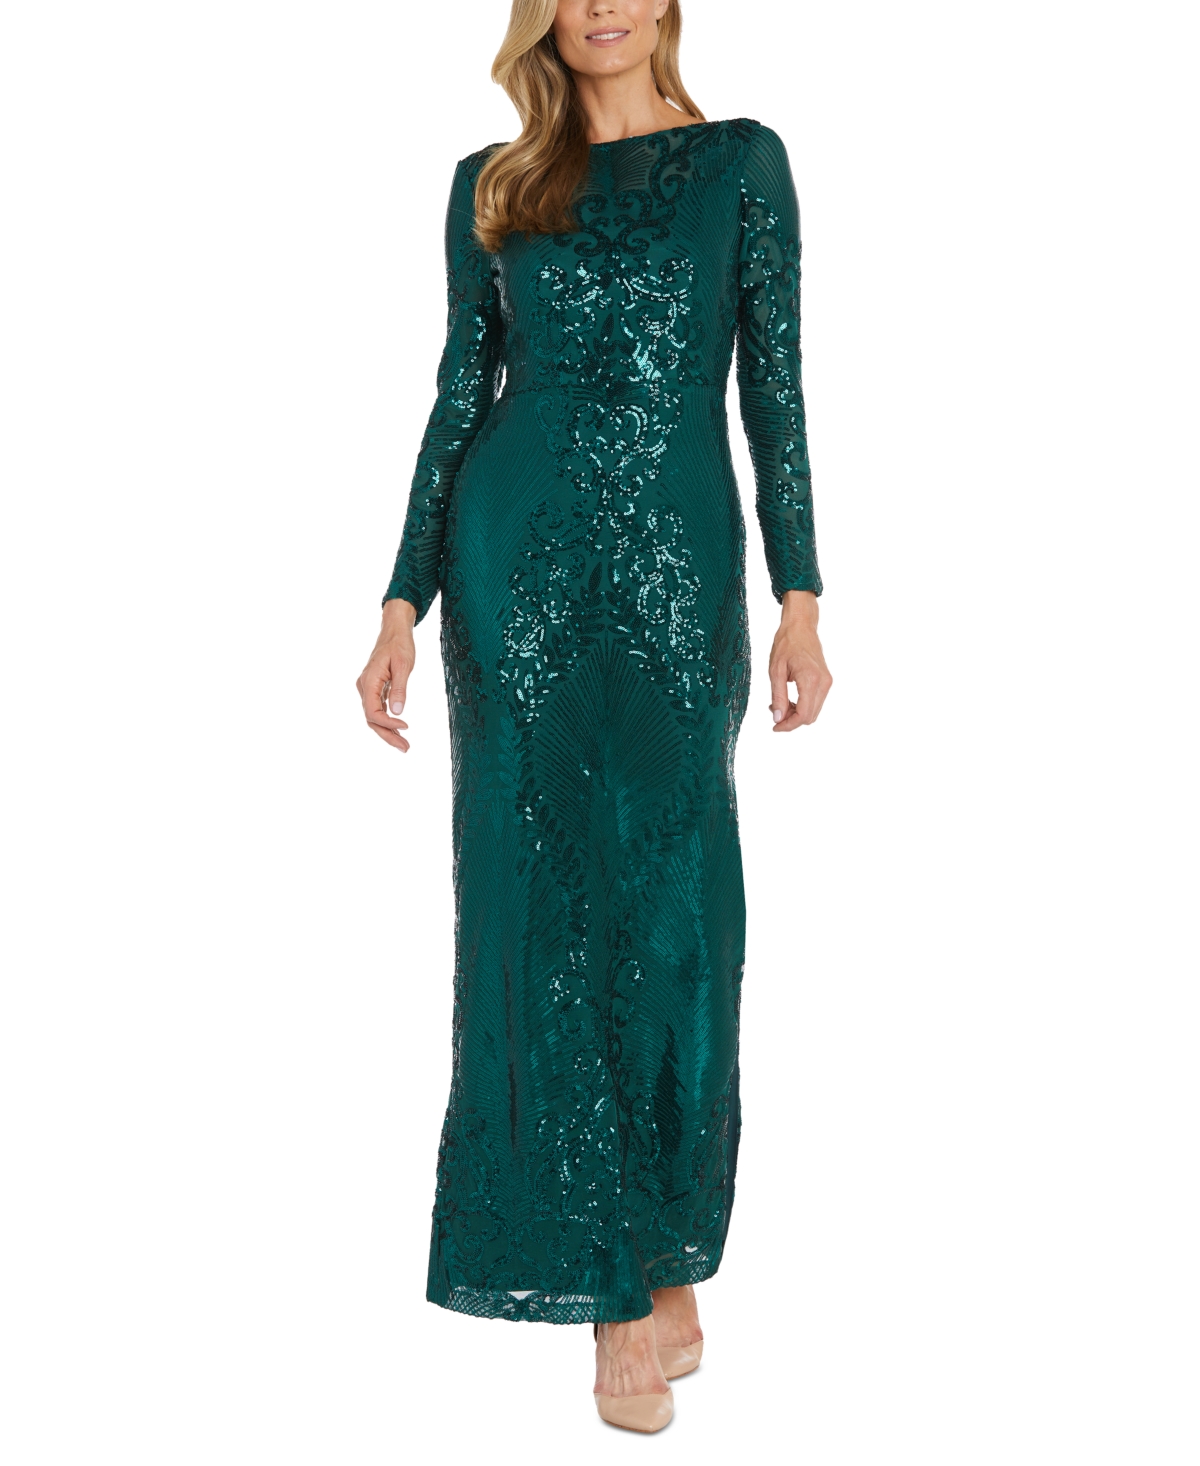 Women's Sequin Long-Sleeve Illusion Gown - Emerald